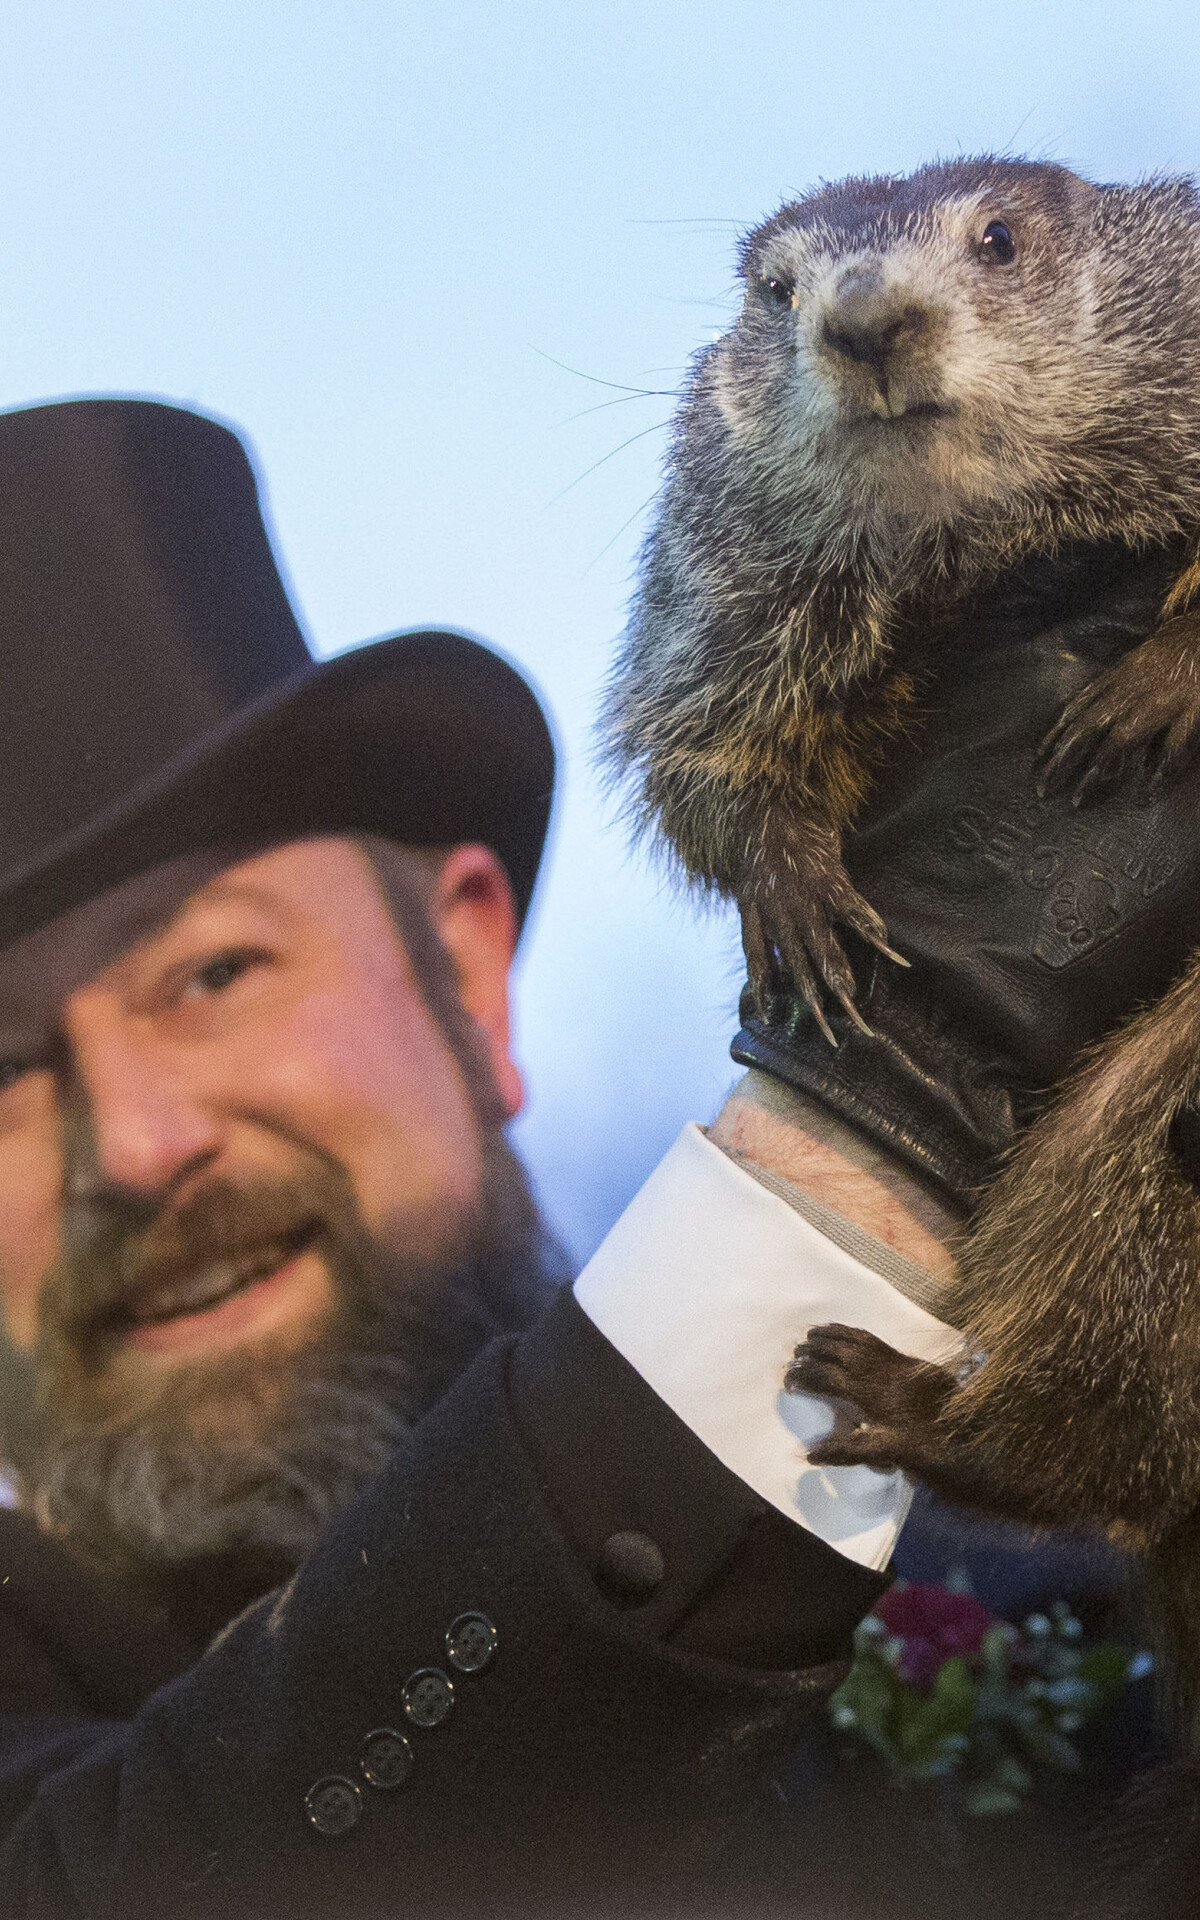 Groundhog Day (Holiday): American tradition, Weather prediction, February 2. 1200x1920 HD Background.